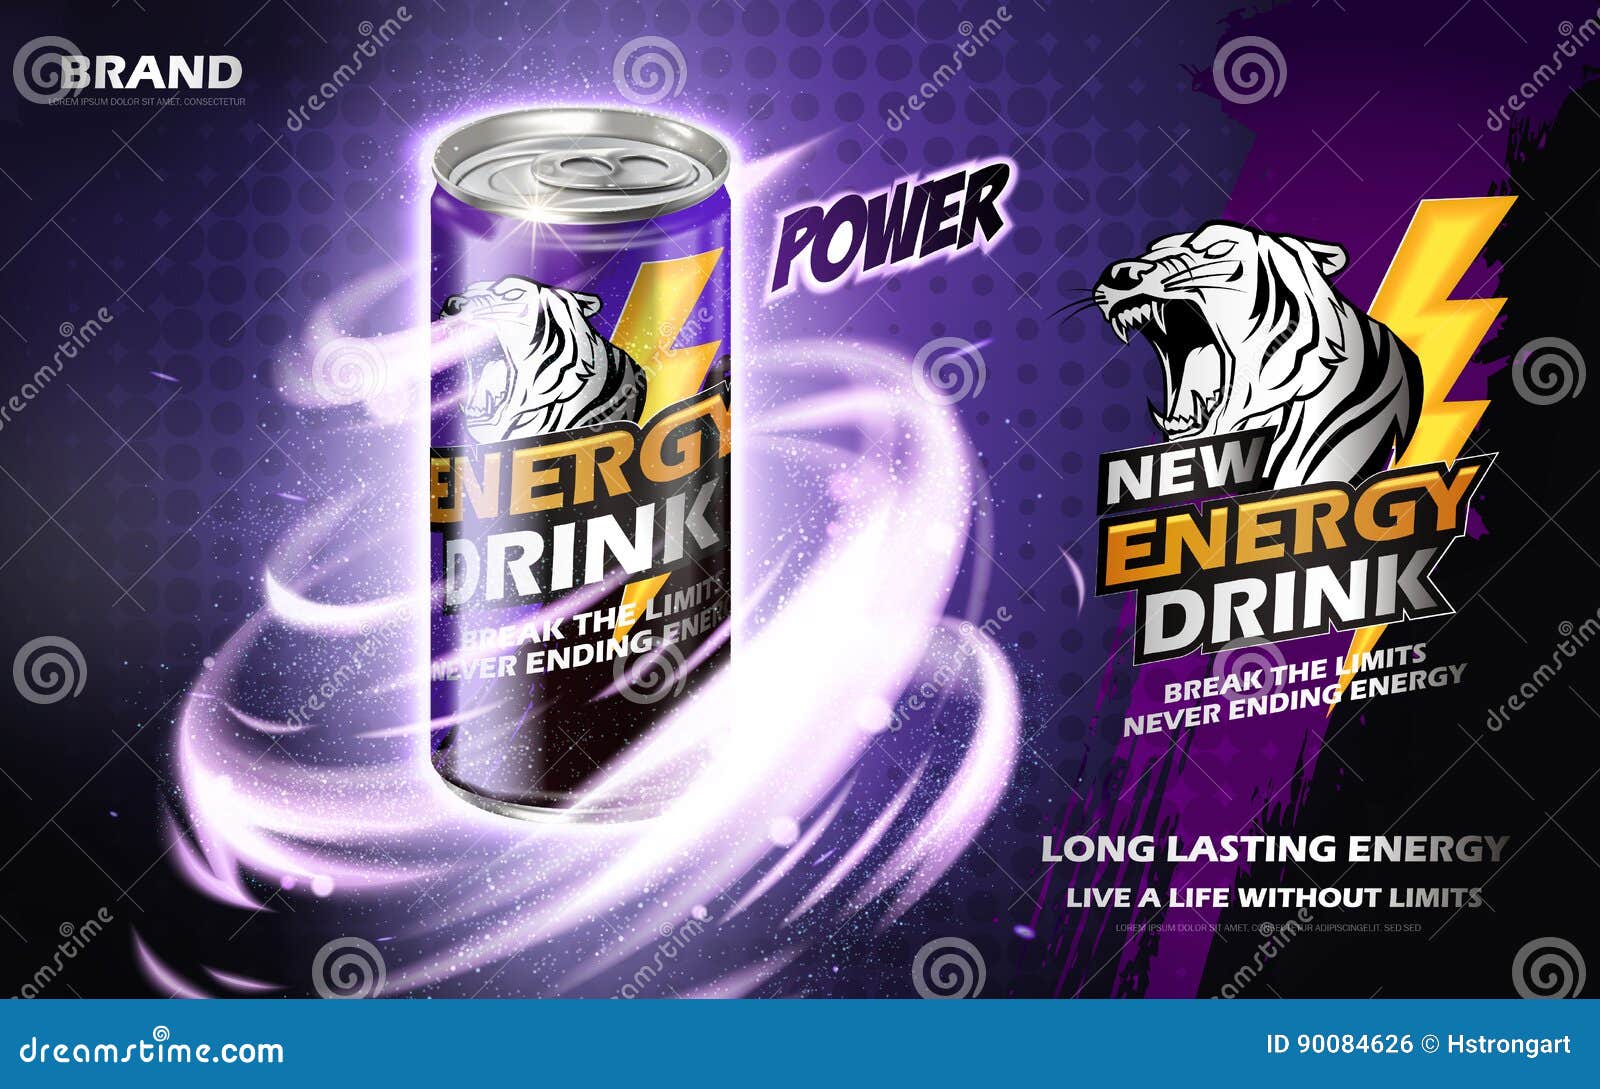 energy drink ad